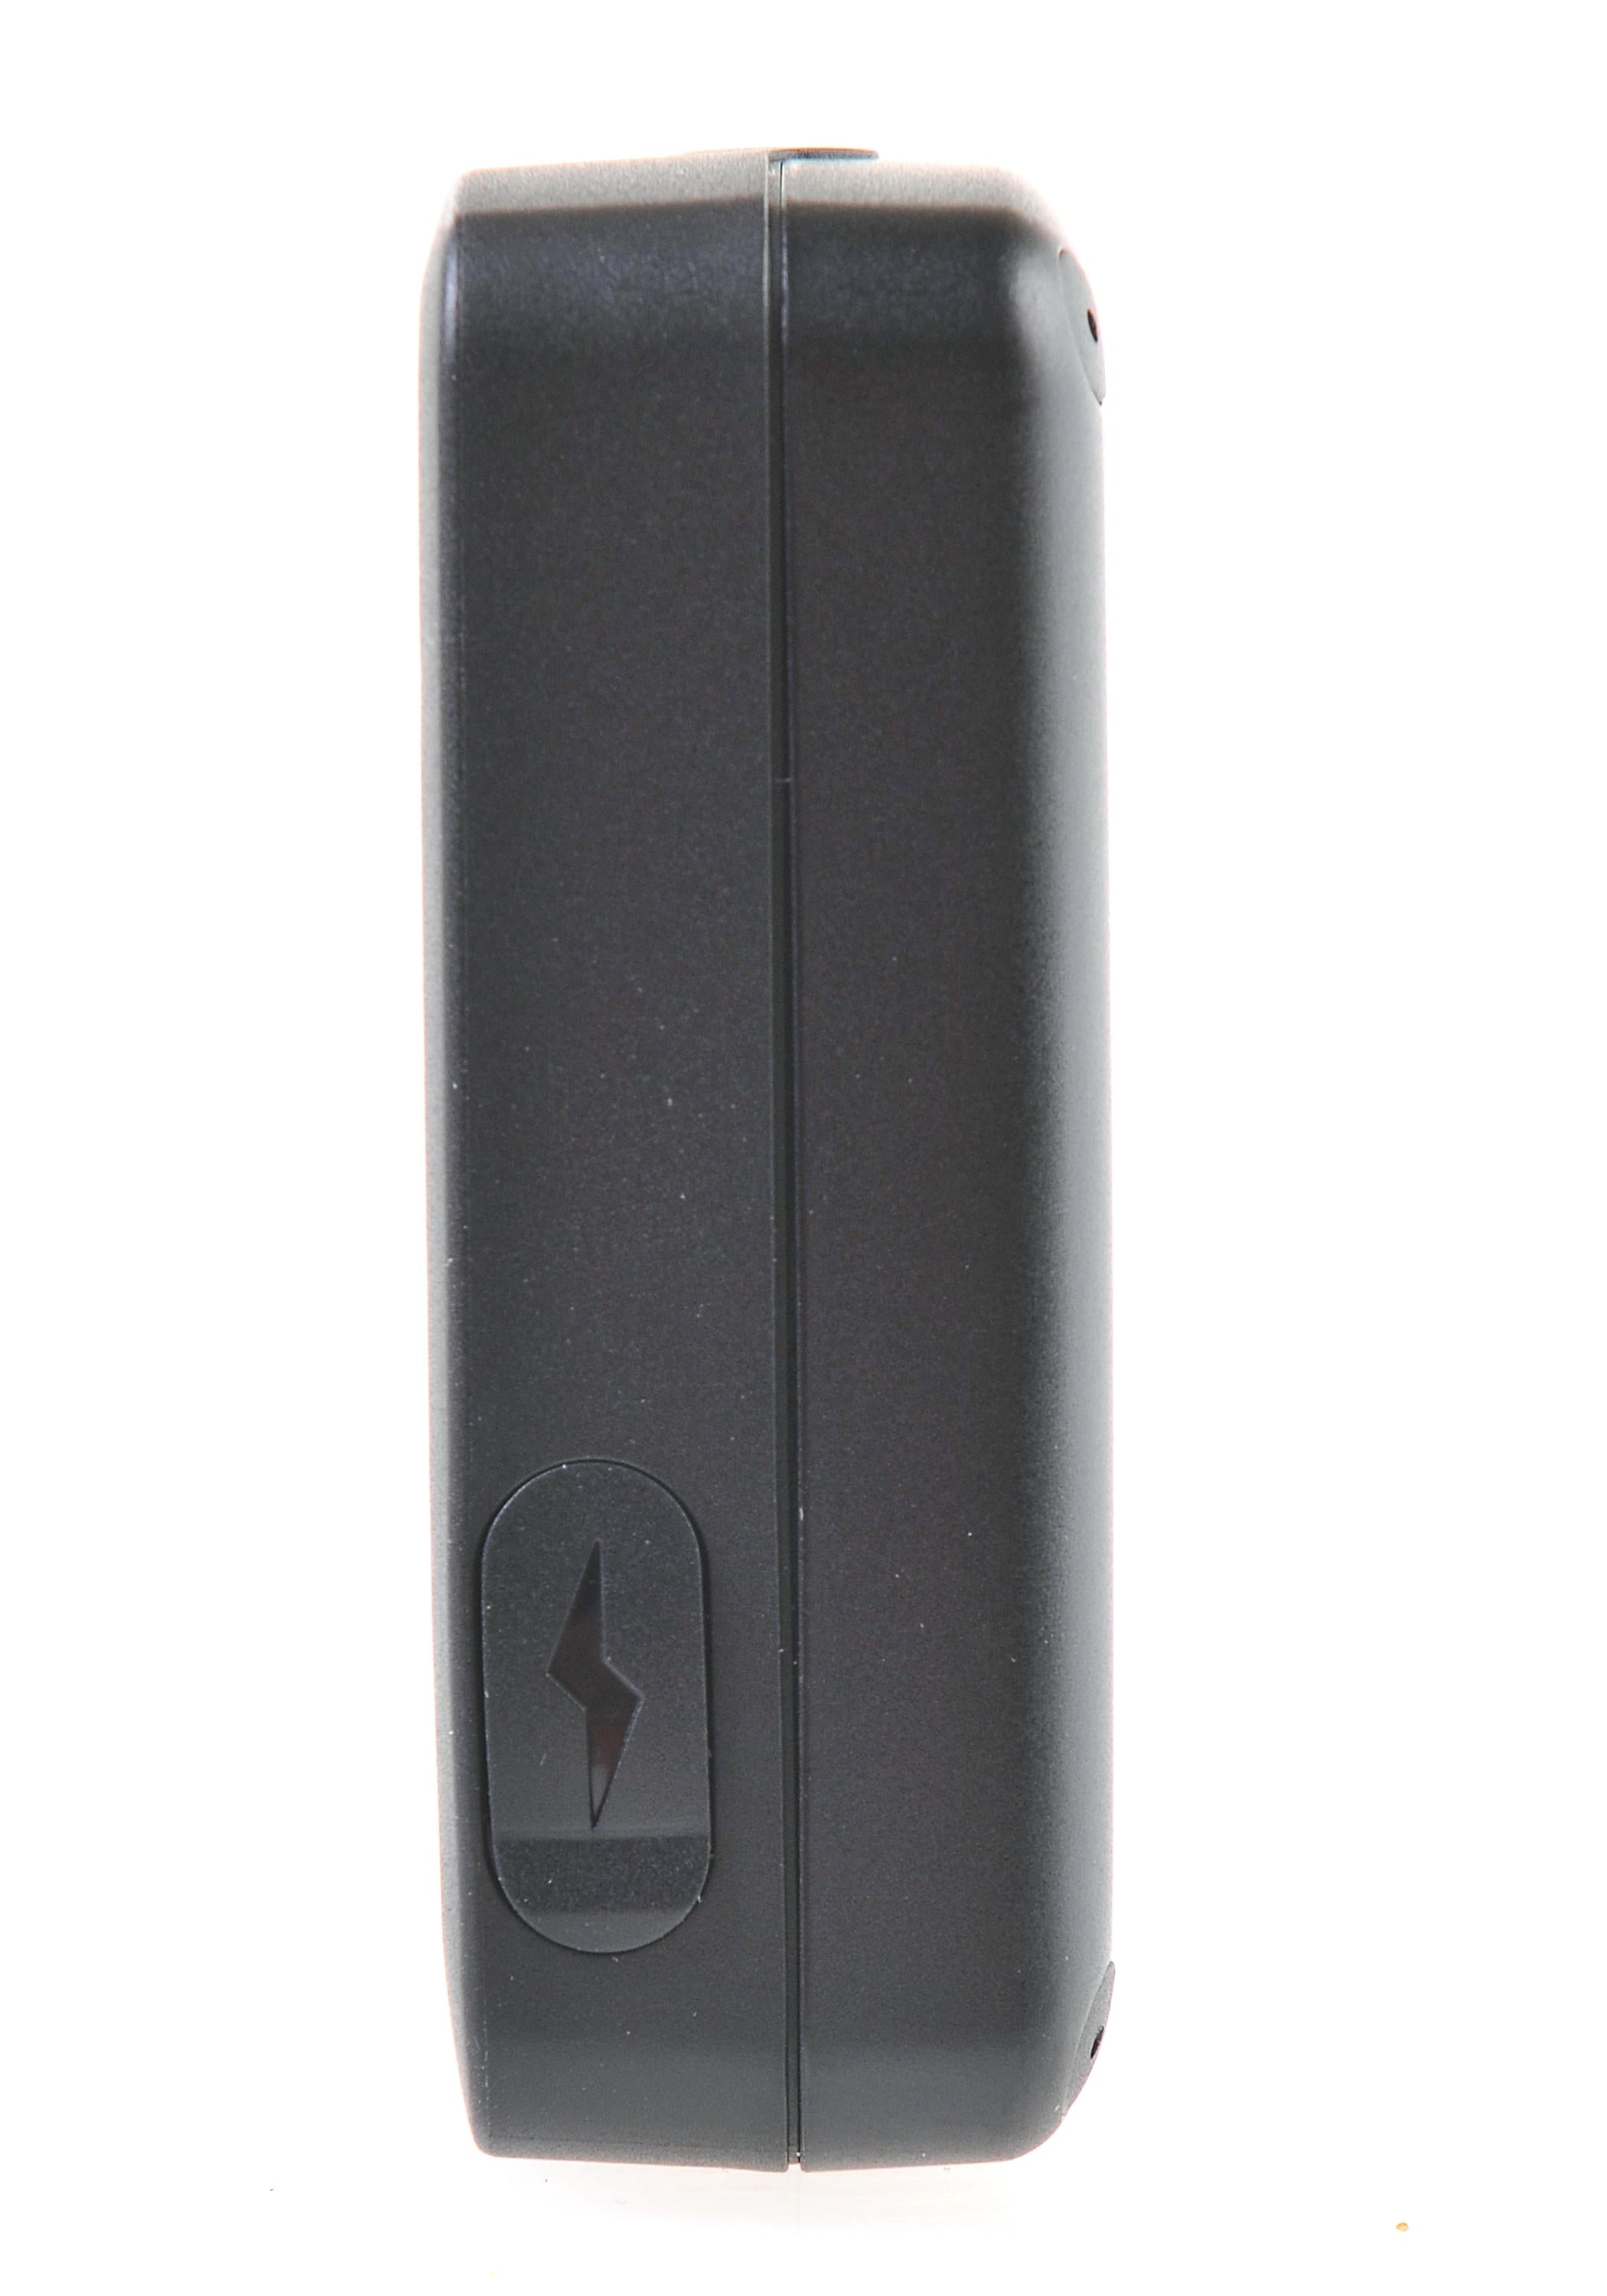 Queclink GL300 GSM/GPS Tracker Right